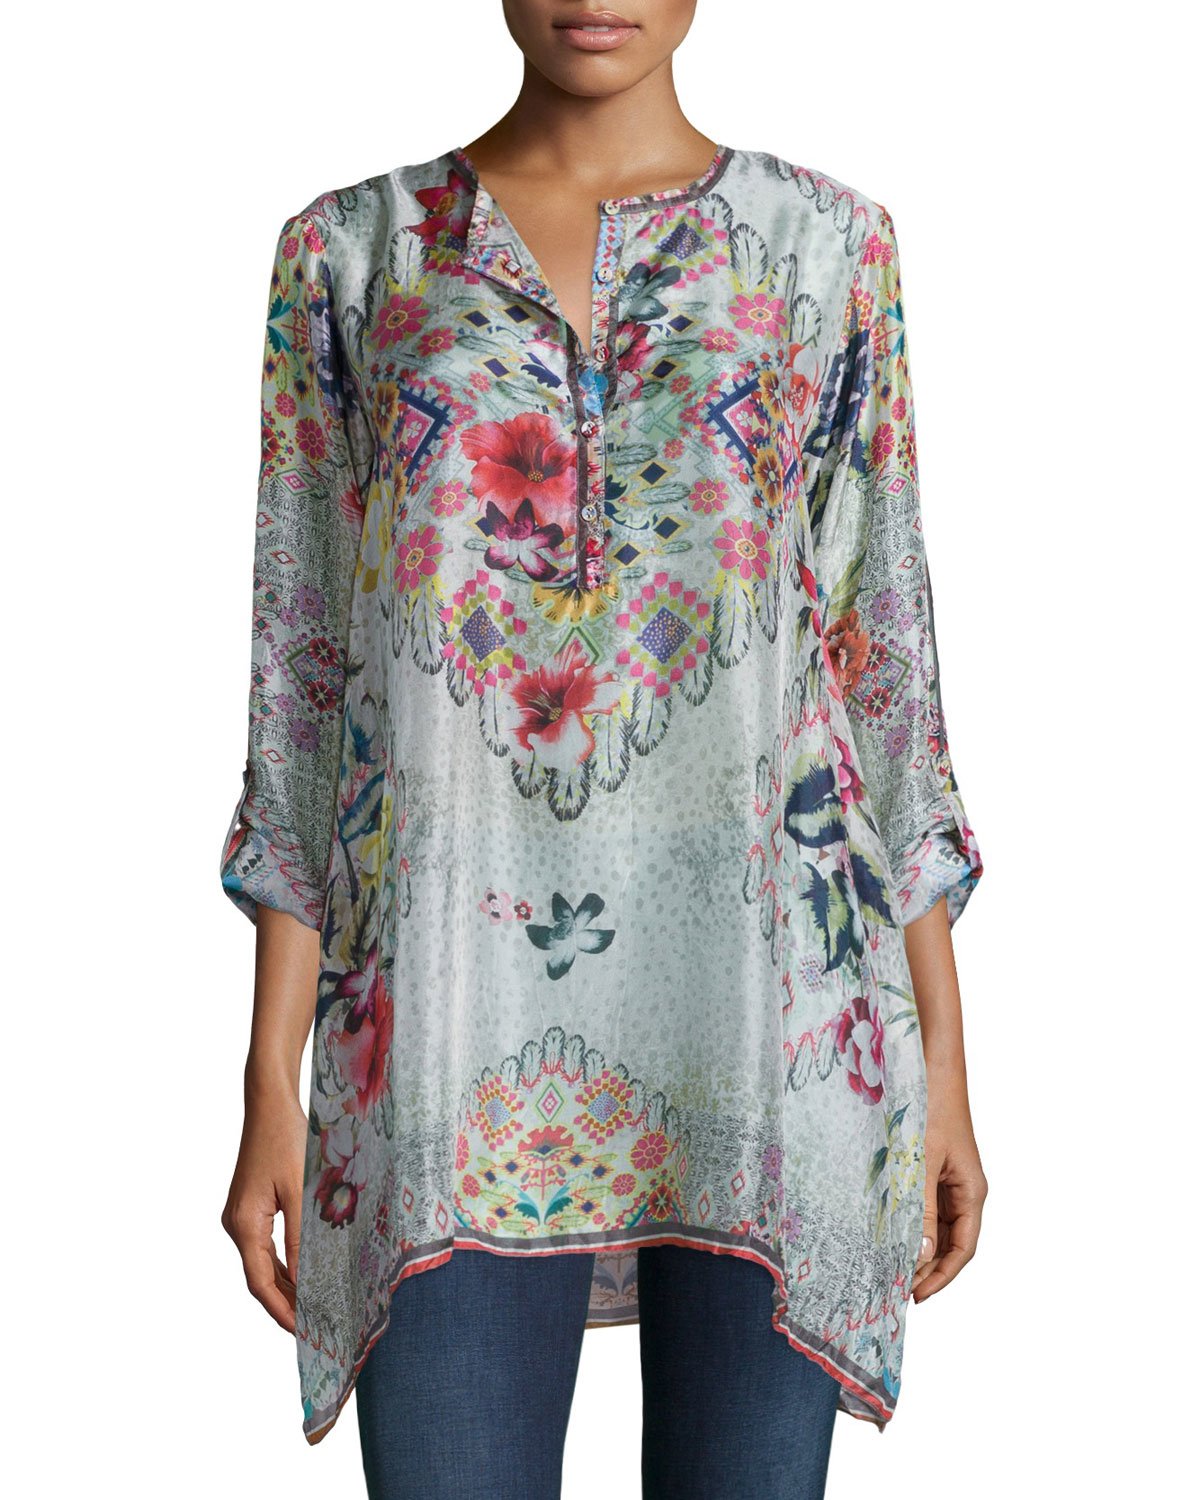 Lyst - Johnny Was Livelli Long-sleeve Printed Tunic